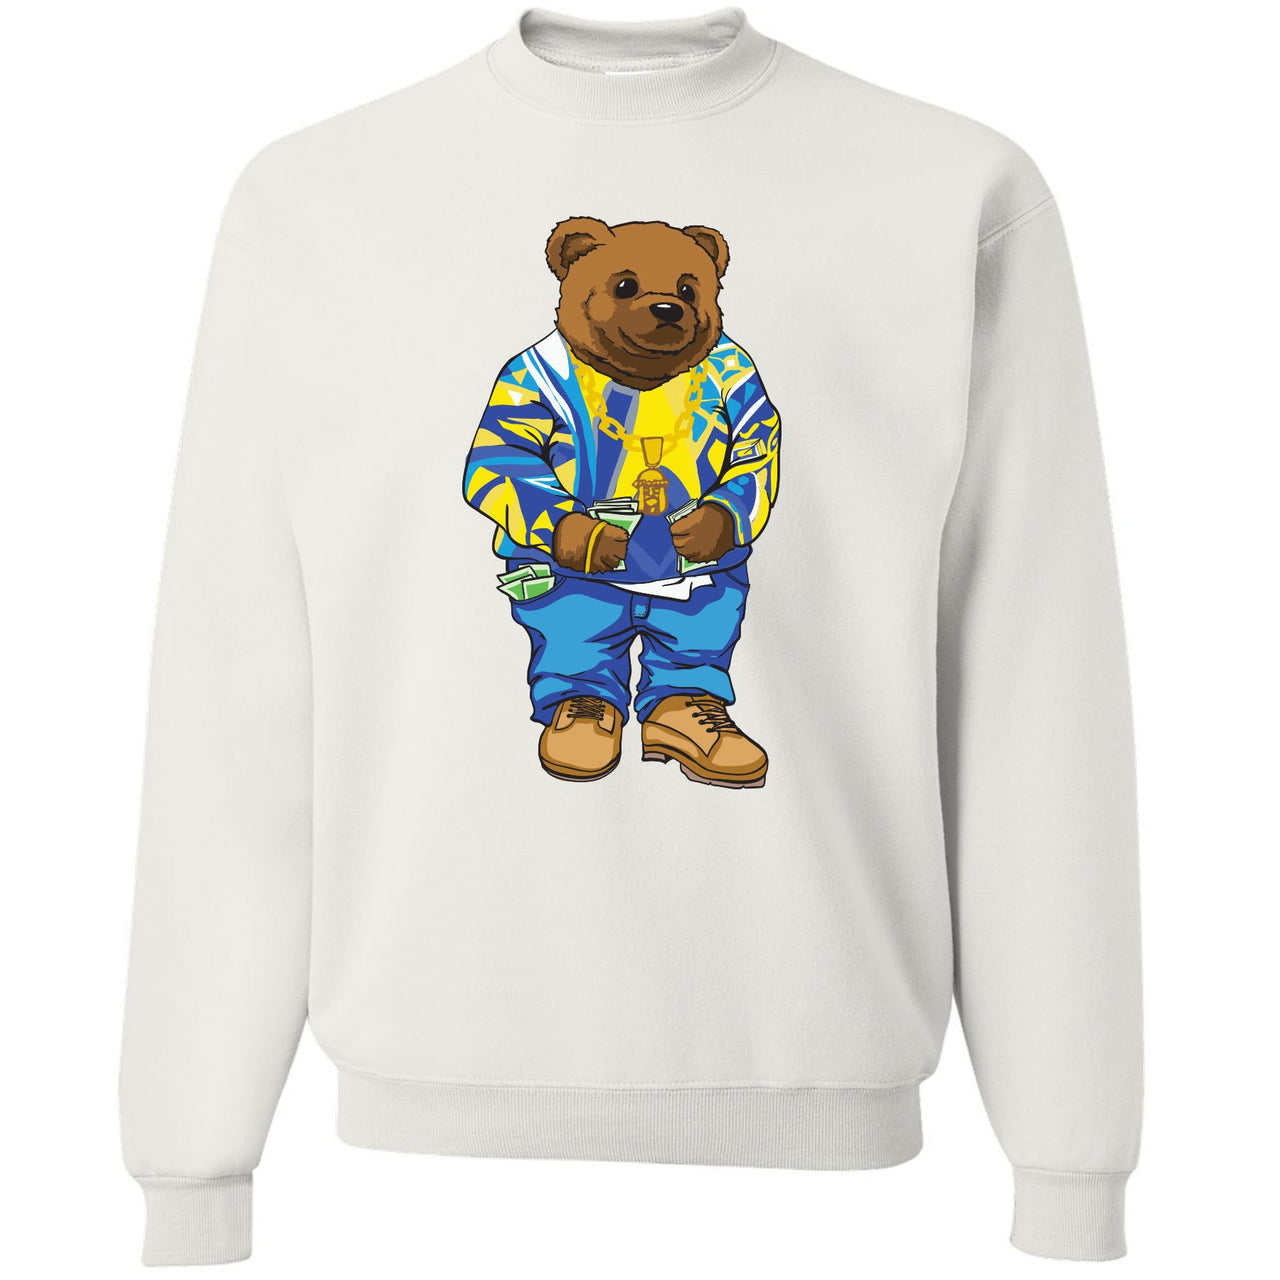 Printed on the front of the Air Jordan 5 Alternate Laney sneaker matching white crewneck is the Sweater Bear wearing a coogi sweater that matches the Air Jordan 5 Laney sneakers